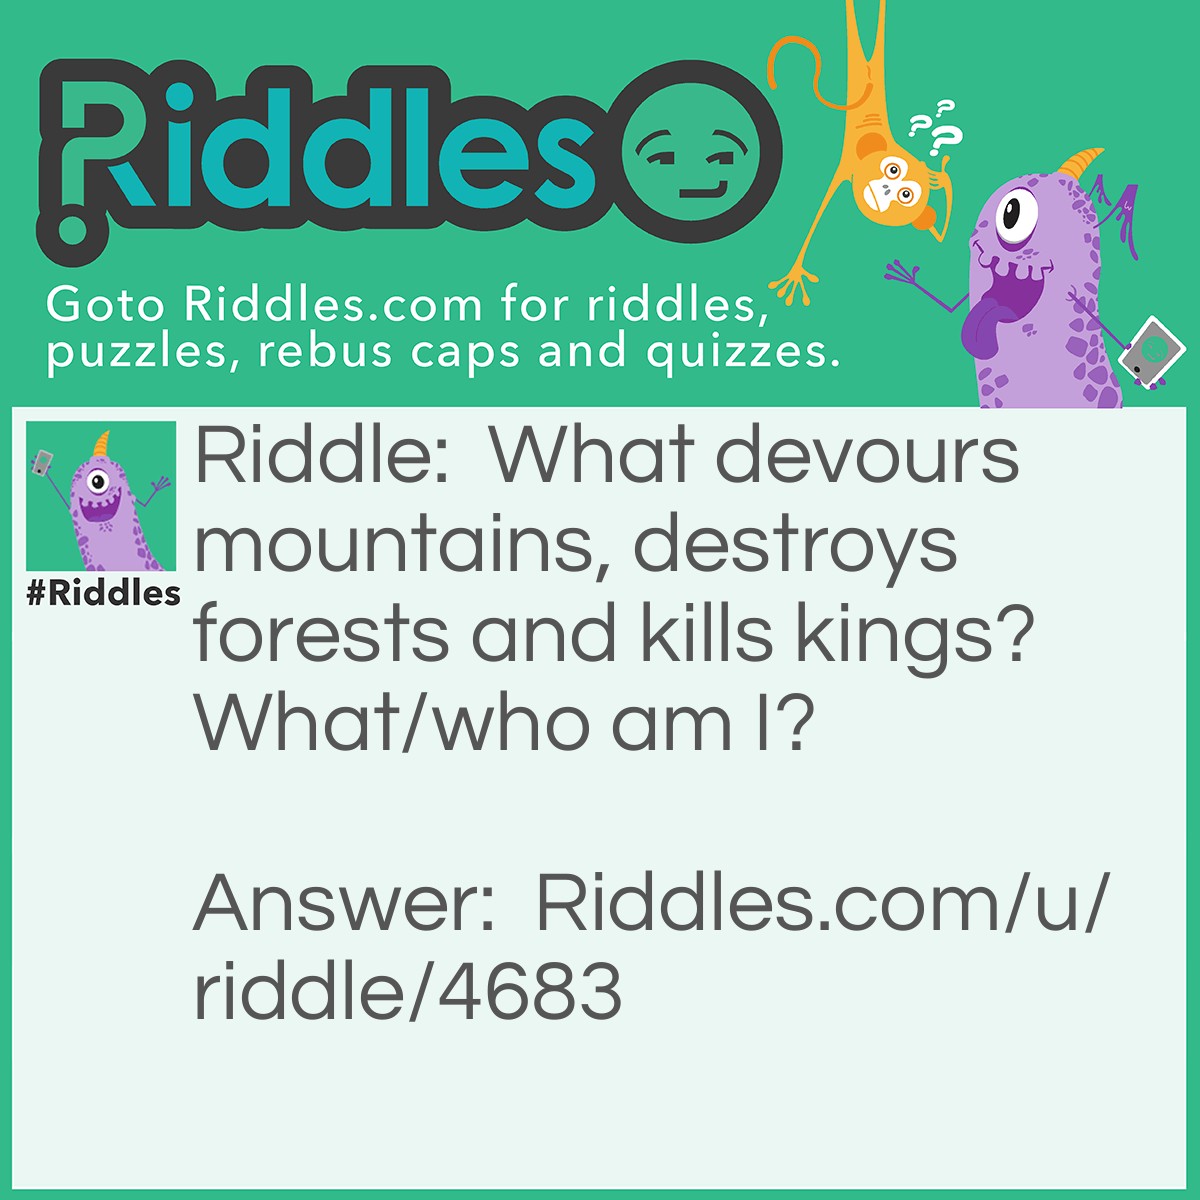 Riddle: What devours mountains, destroys forests and kills kings? What/who am I? Answer: Time.